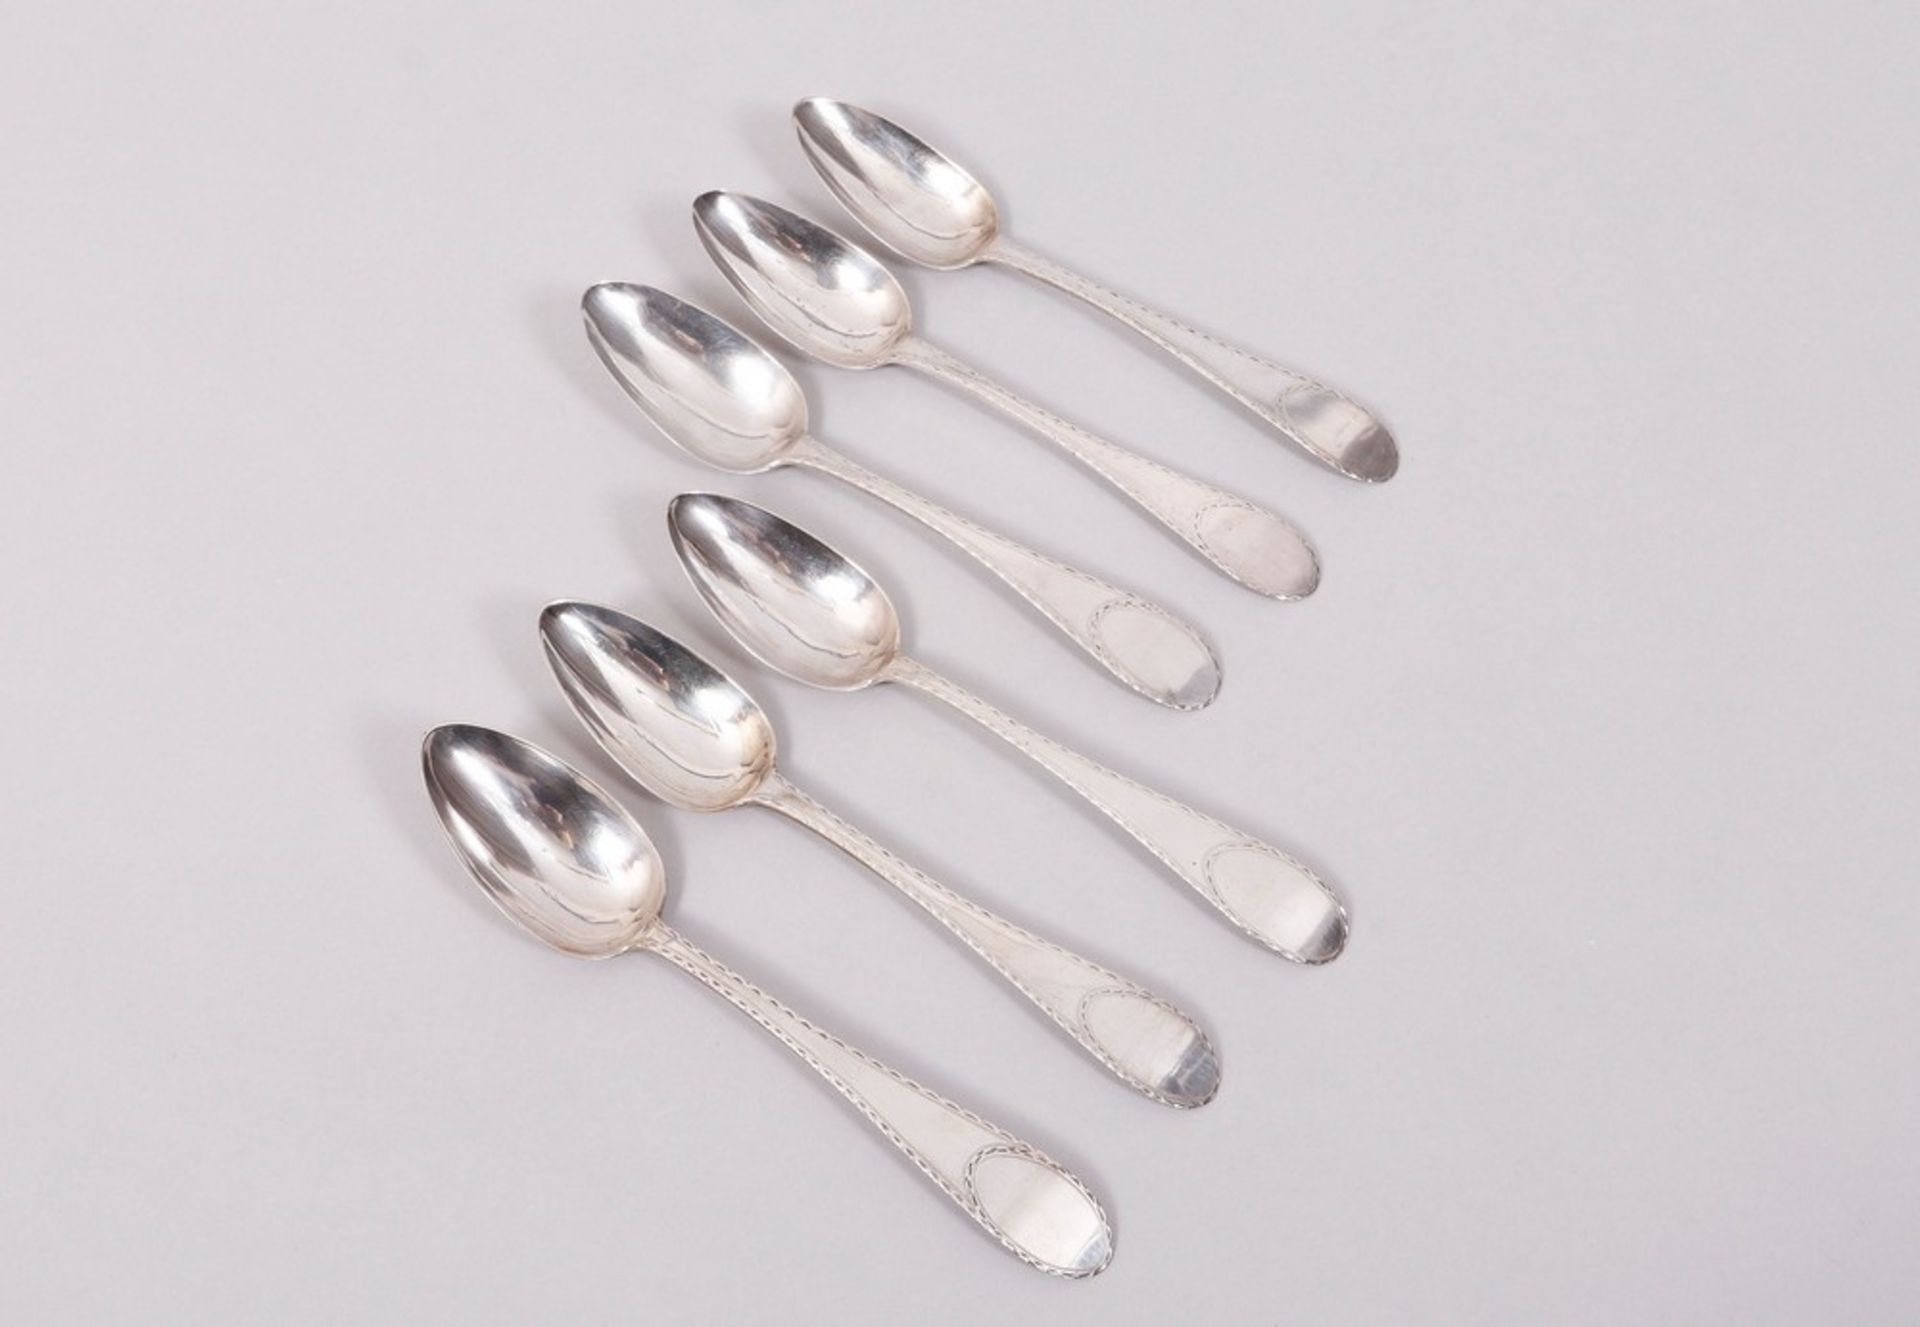 6 dining spoons, silver, German, c. 1800/10 - Image 2 of 7